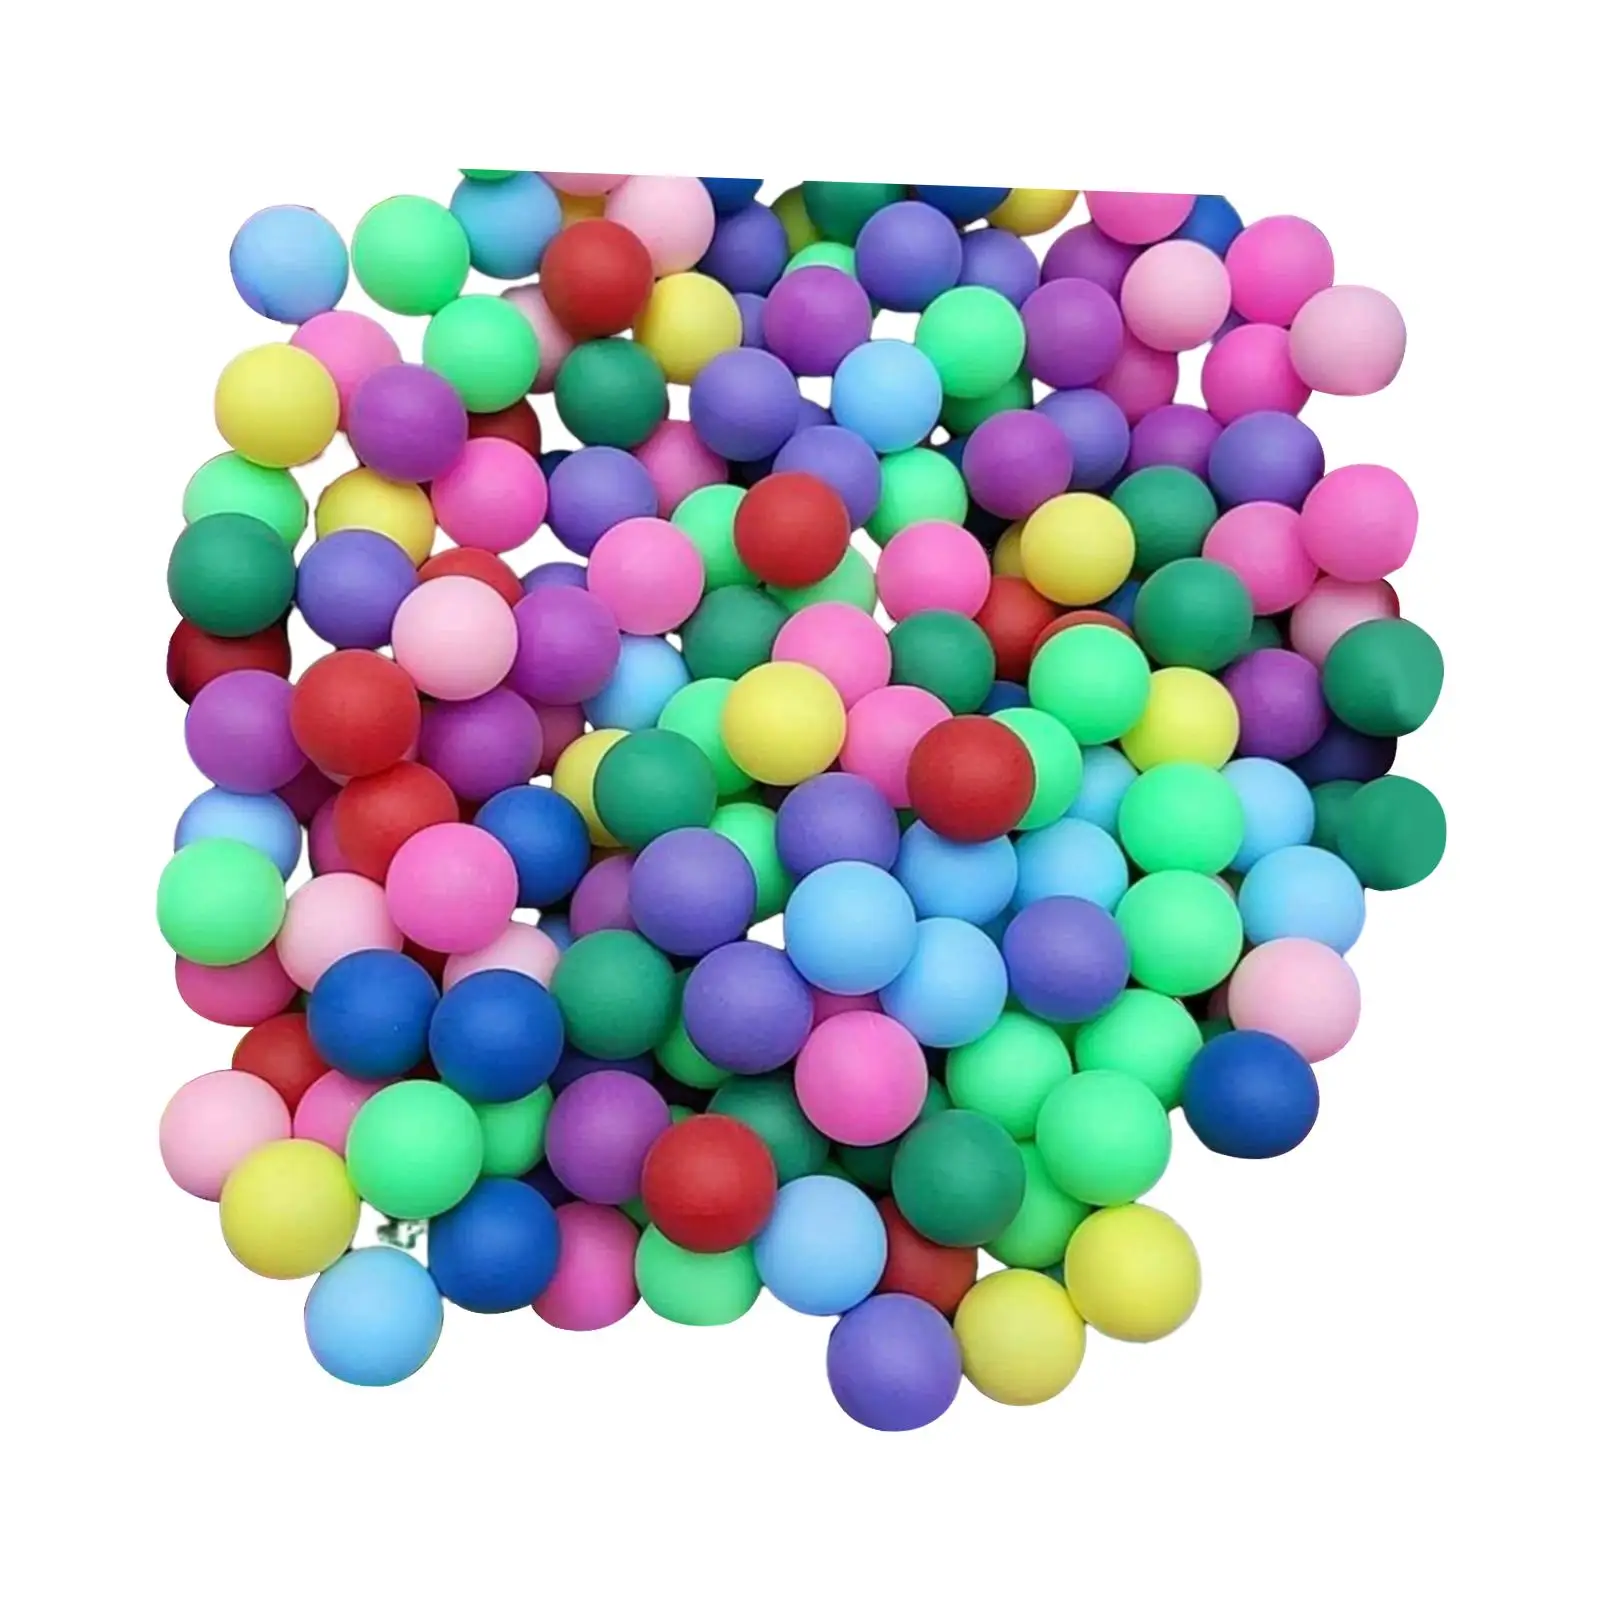 150Pcs Ping Pong Balls Entertainment Table Tennis Balls Colorful for Sports Family Games School Games Carnival Recreational Play